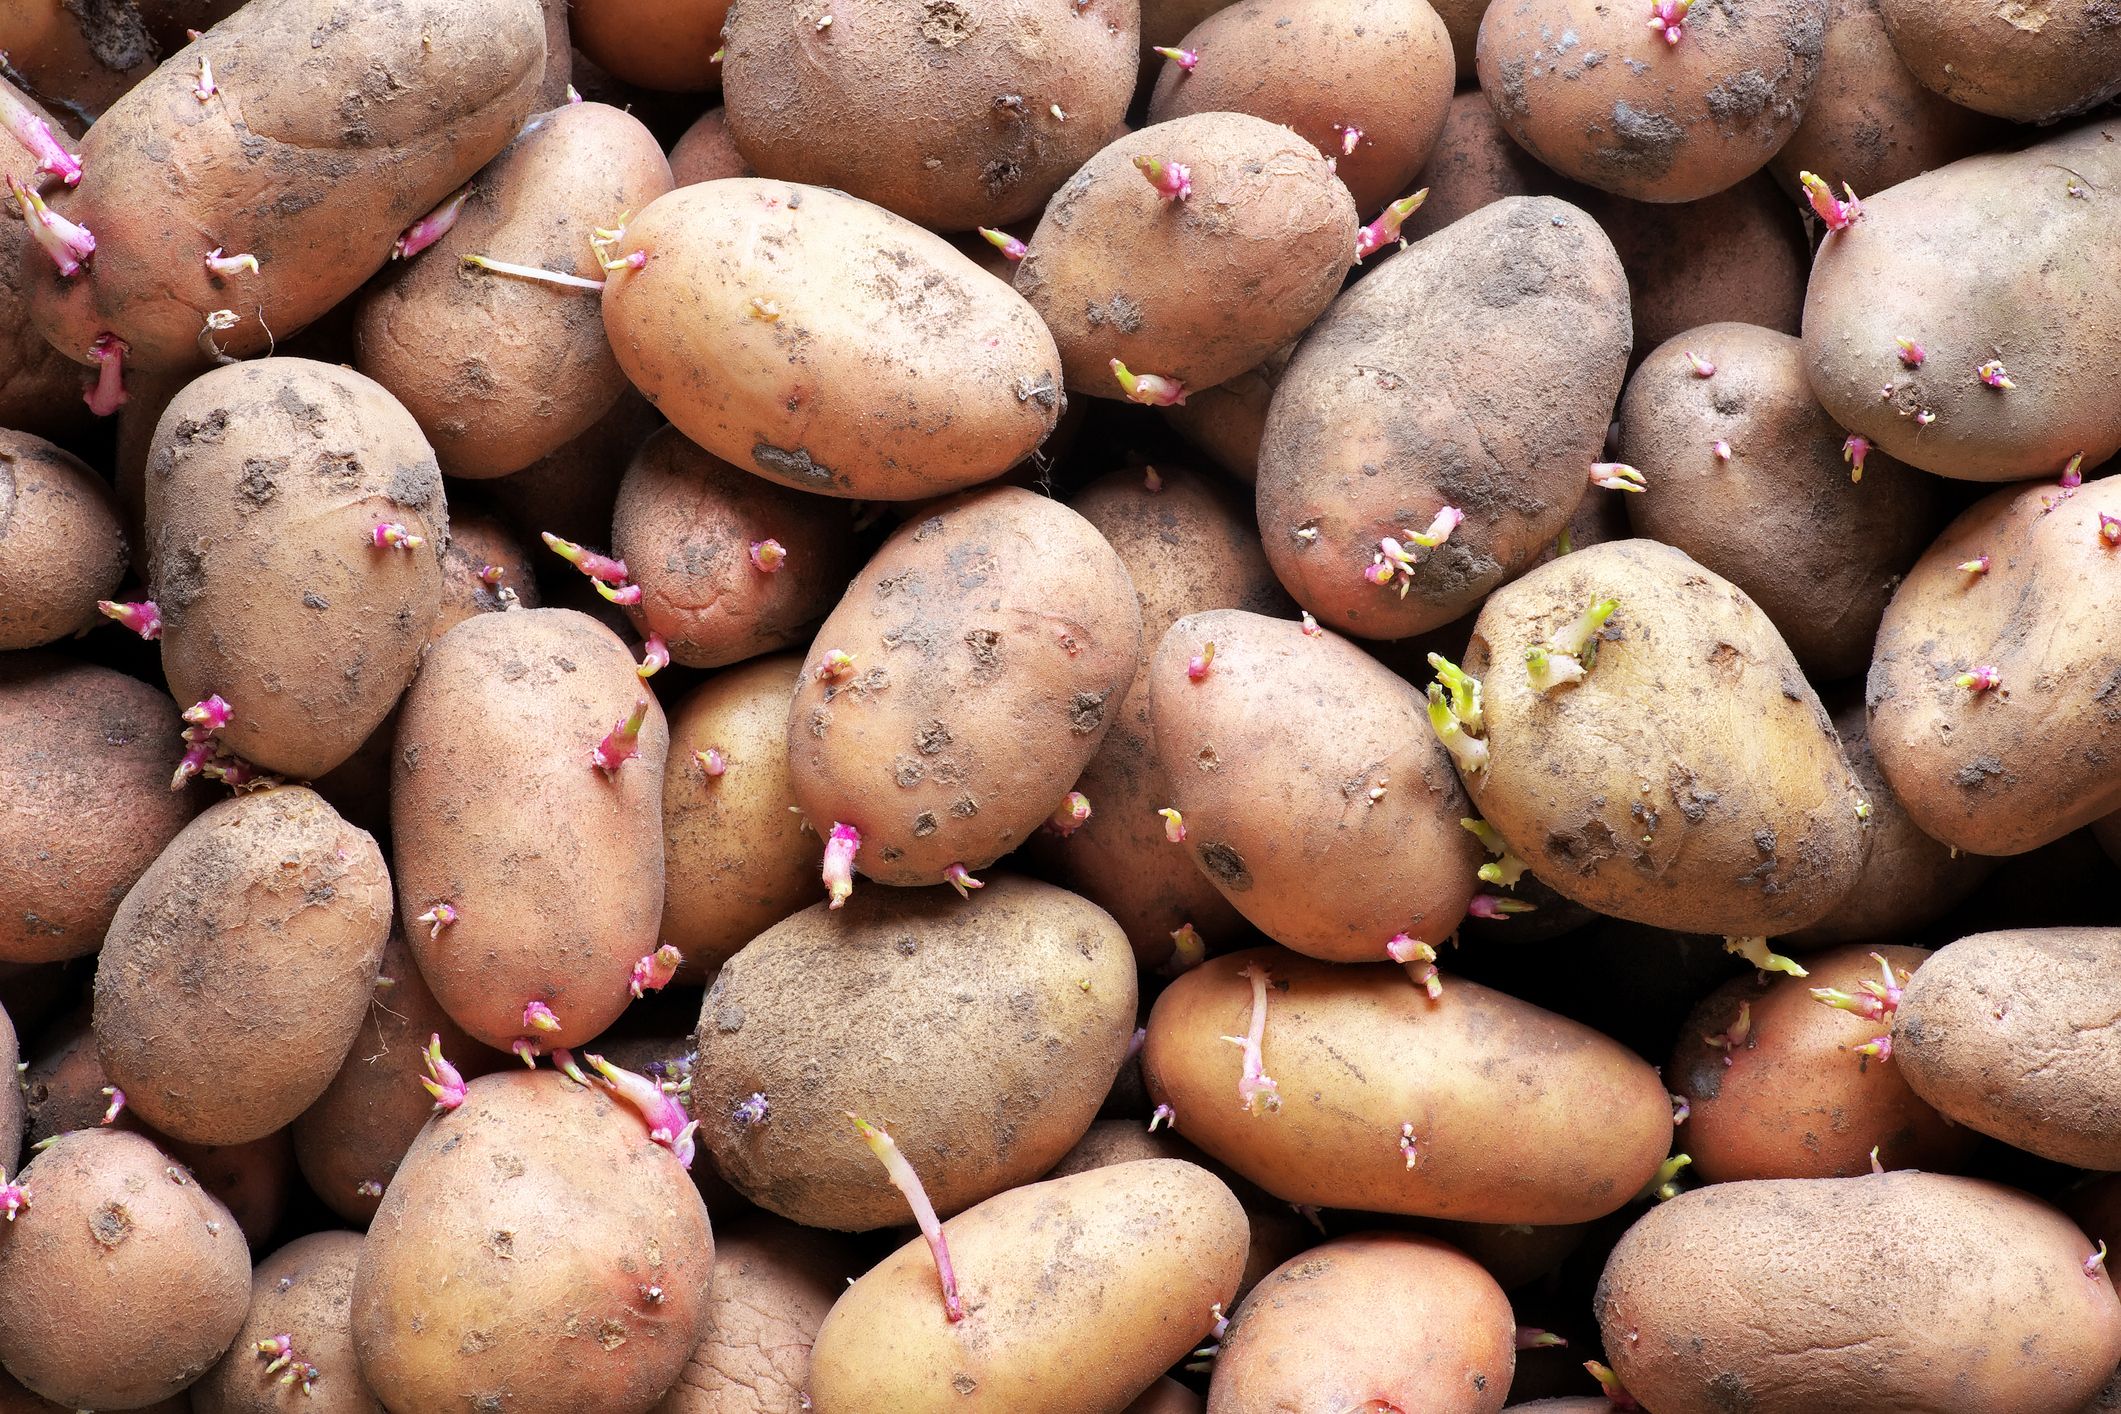 https://hips.hearstapps.com/hmg-prod/images/sprouting-seed-potatoes-ready-for-planting-royalty-free-image-1697559101.jpg